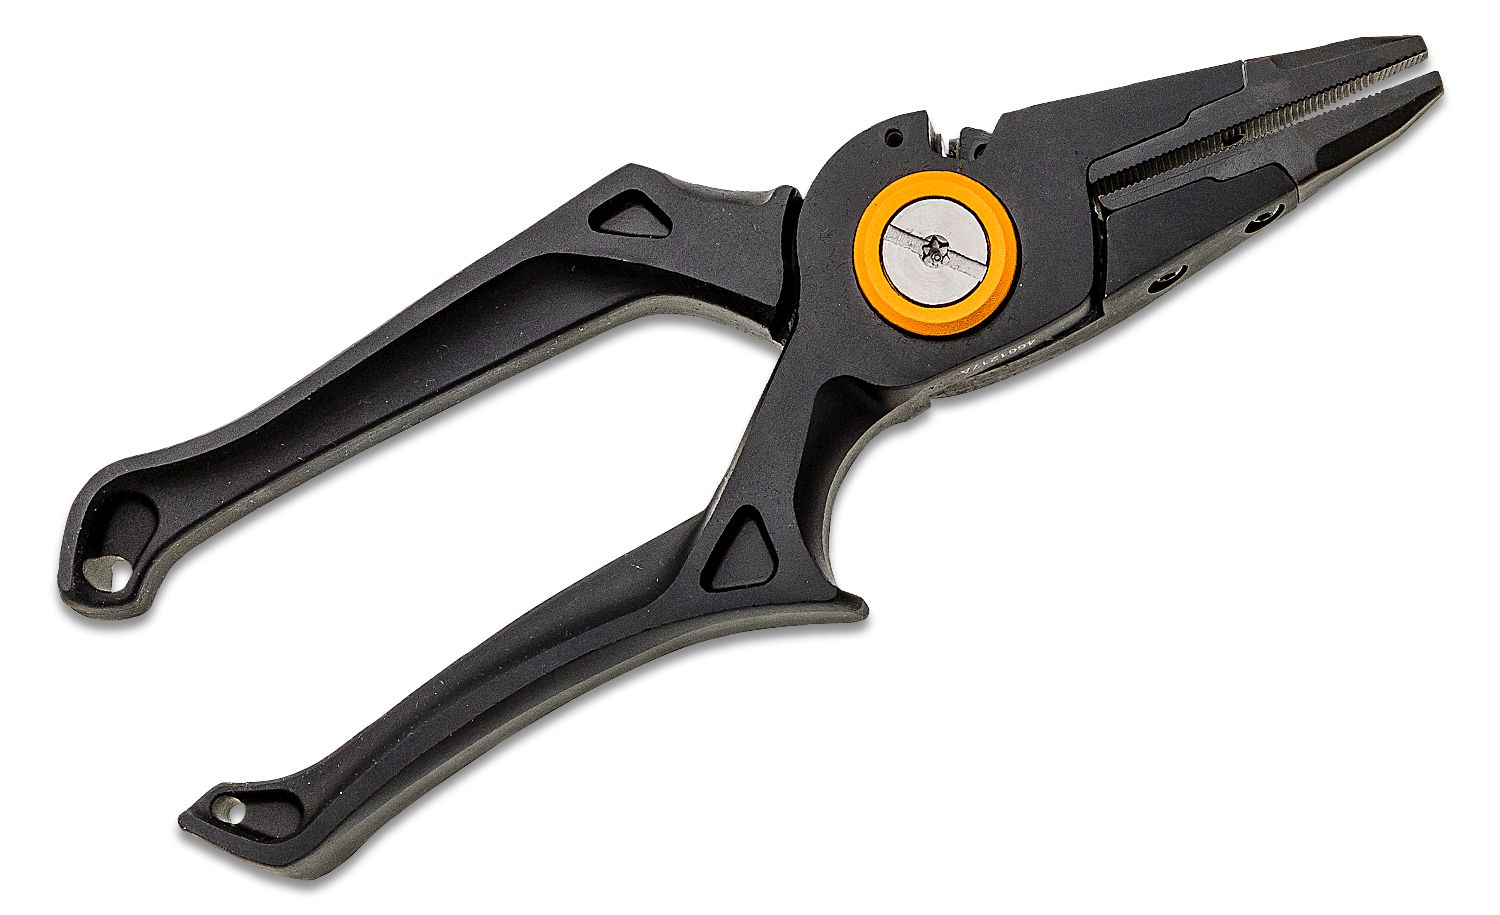 Gerber Fishing Series Magniplier 7.5 Locking Pliers - KnifeCenter -  31-003137 - Discontinued